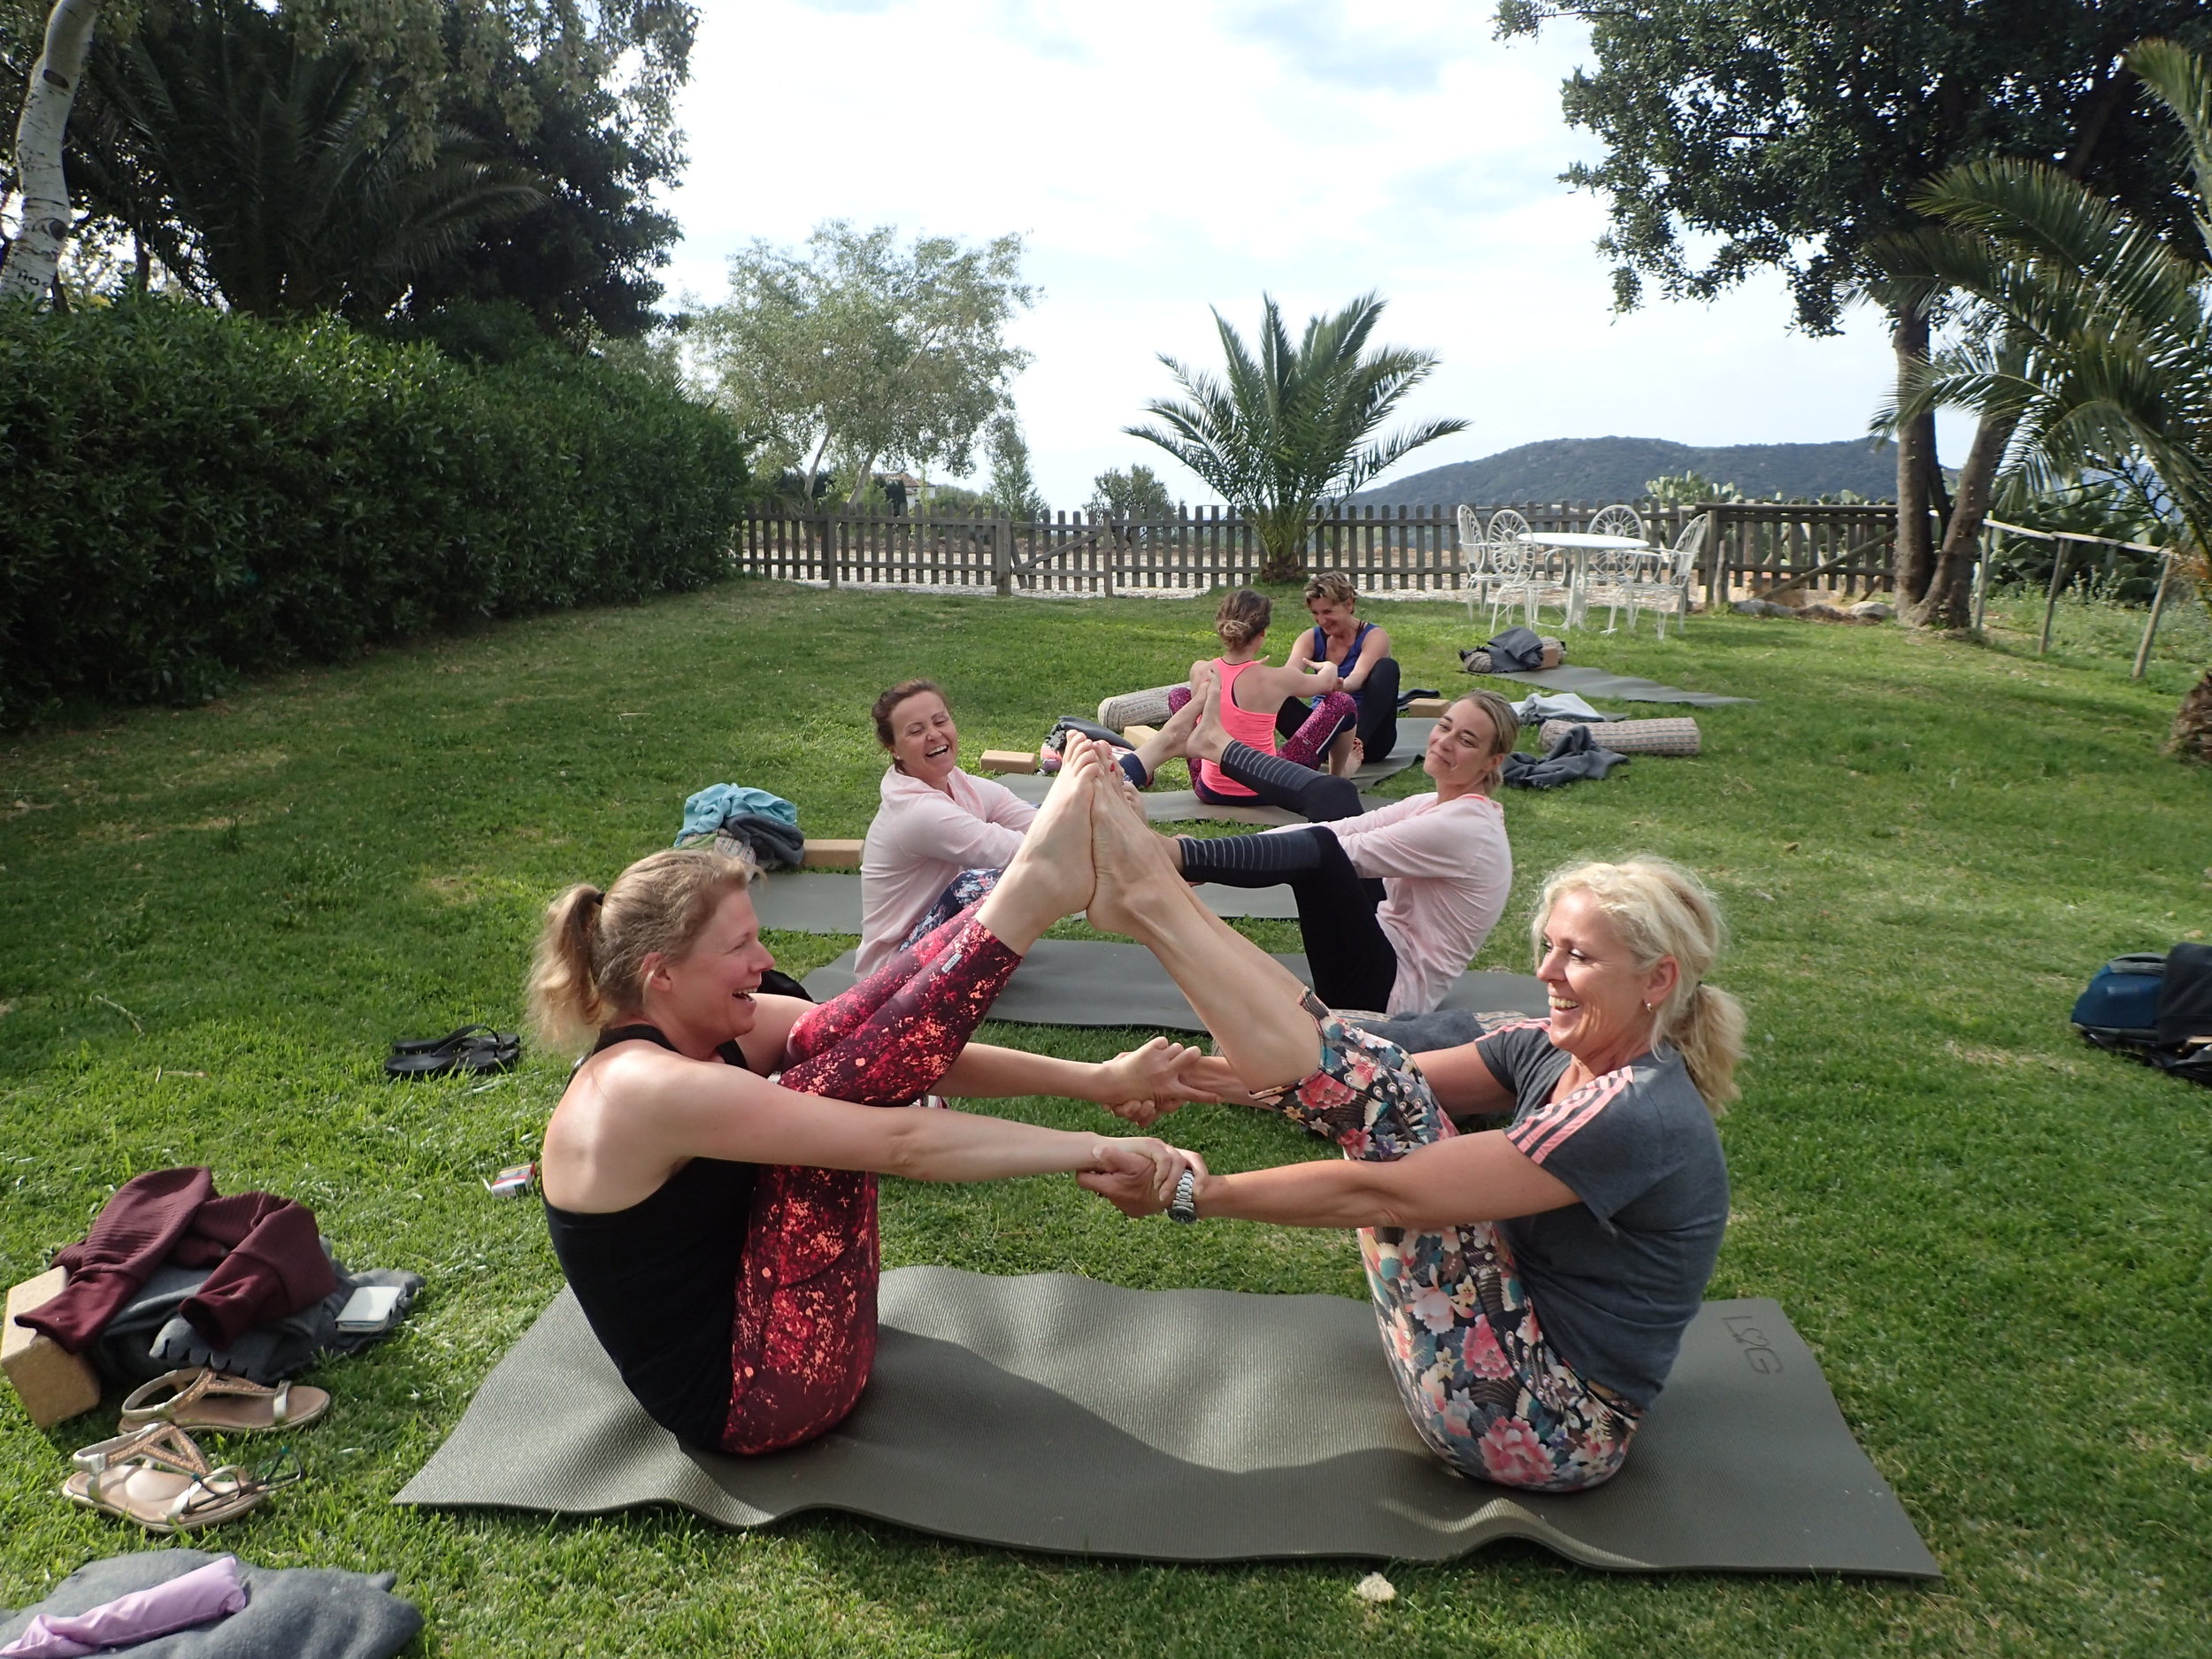 Partner yoga in the garden at Yin Yang Yoga retreat in the Malaga mountains in Spain with Jane Bakx Yoga (Copy)